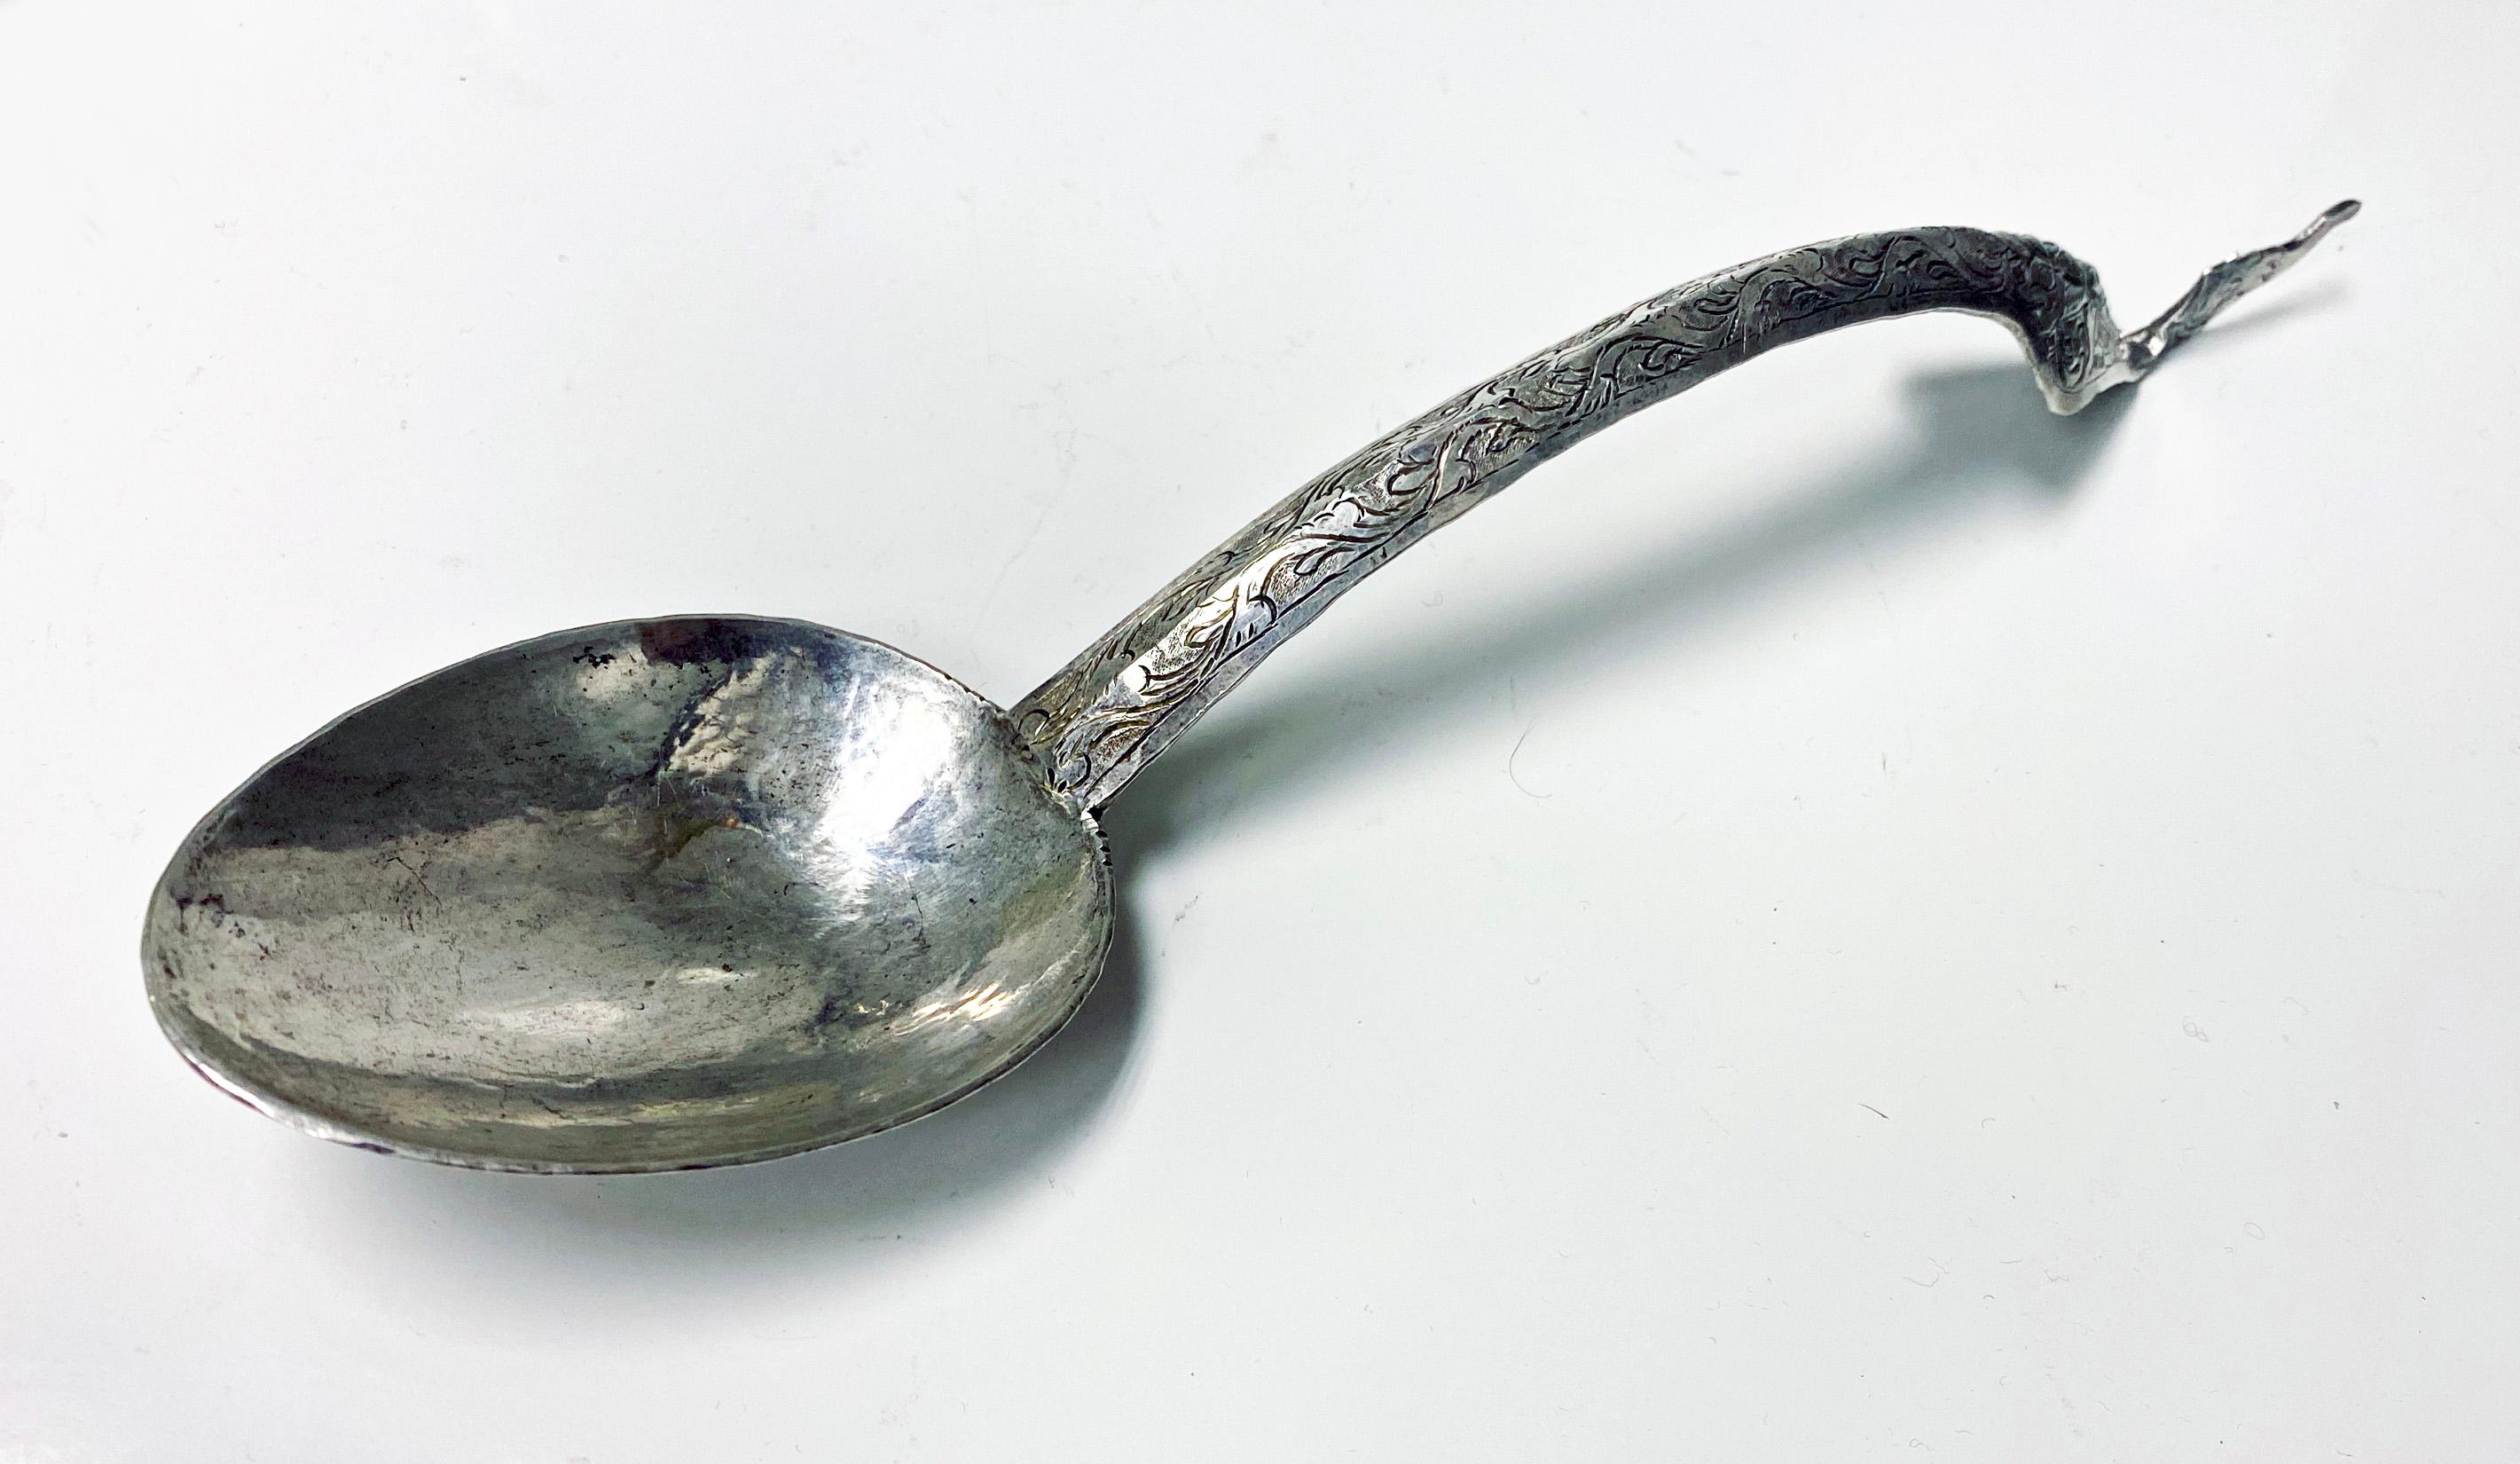 Thai silver rice serving ladle spoon. High grade, beaten silver ceremonial ladle. The long handle has an elongated lozenge shape with a stylised flame or dragon like motif finial. The bowl of the spoon is oval shaped. The front of the handle and